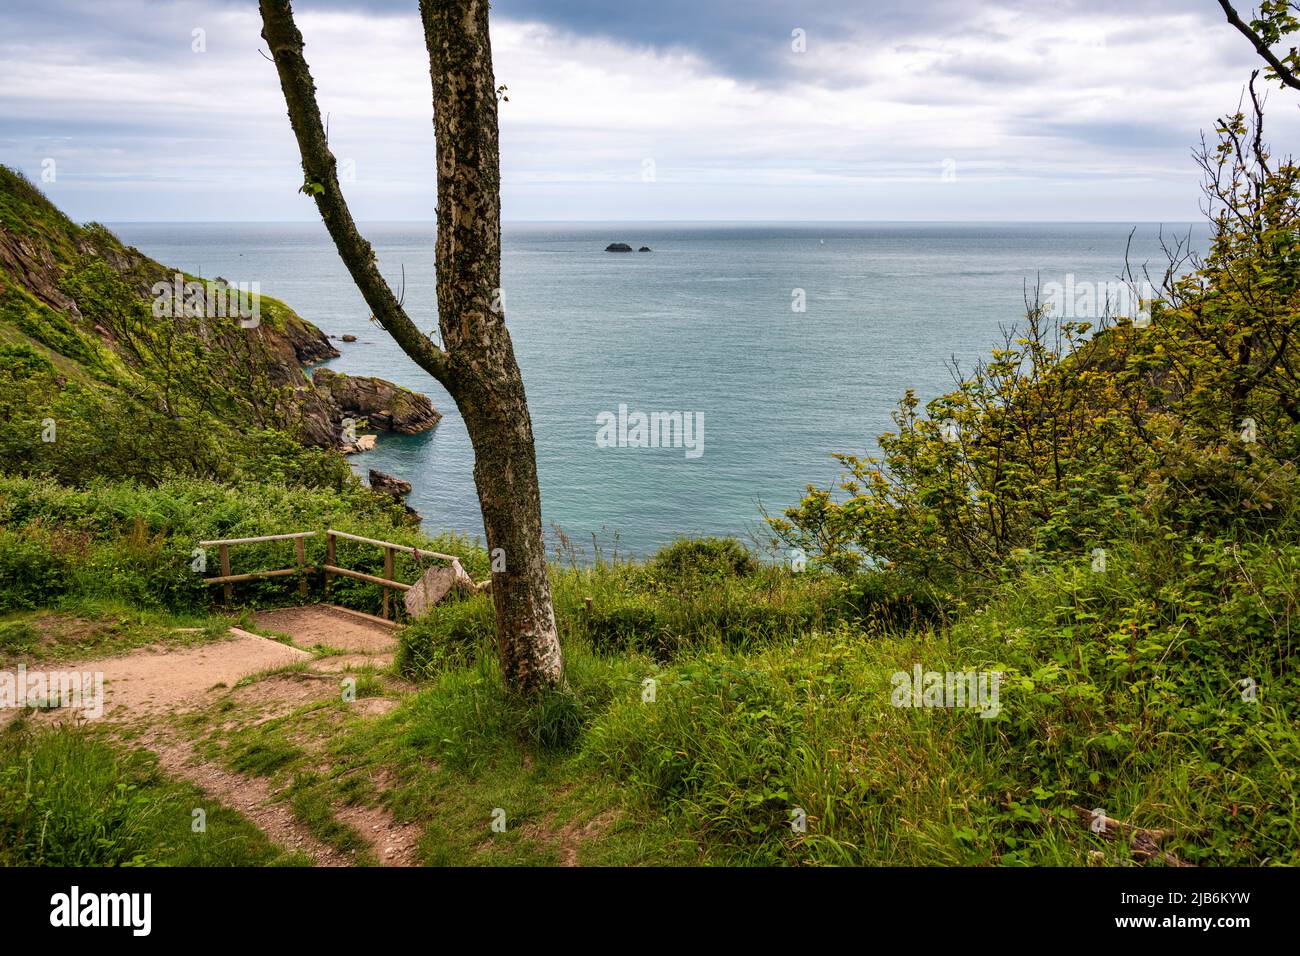 Coastal view from the grounds of Coleton Fishacre, Devon, UK.  Eastern Black Rock can be seen in the sea. Stock Photo